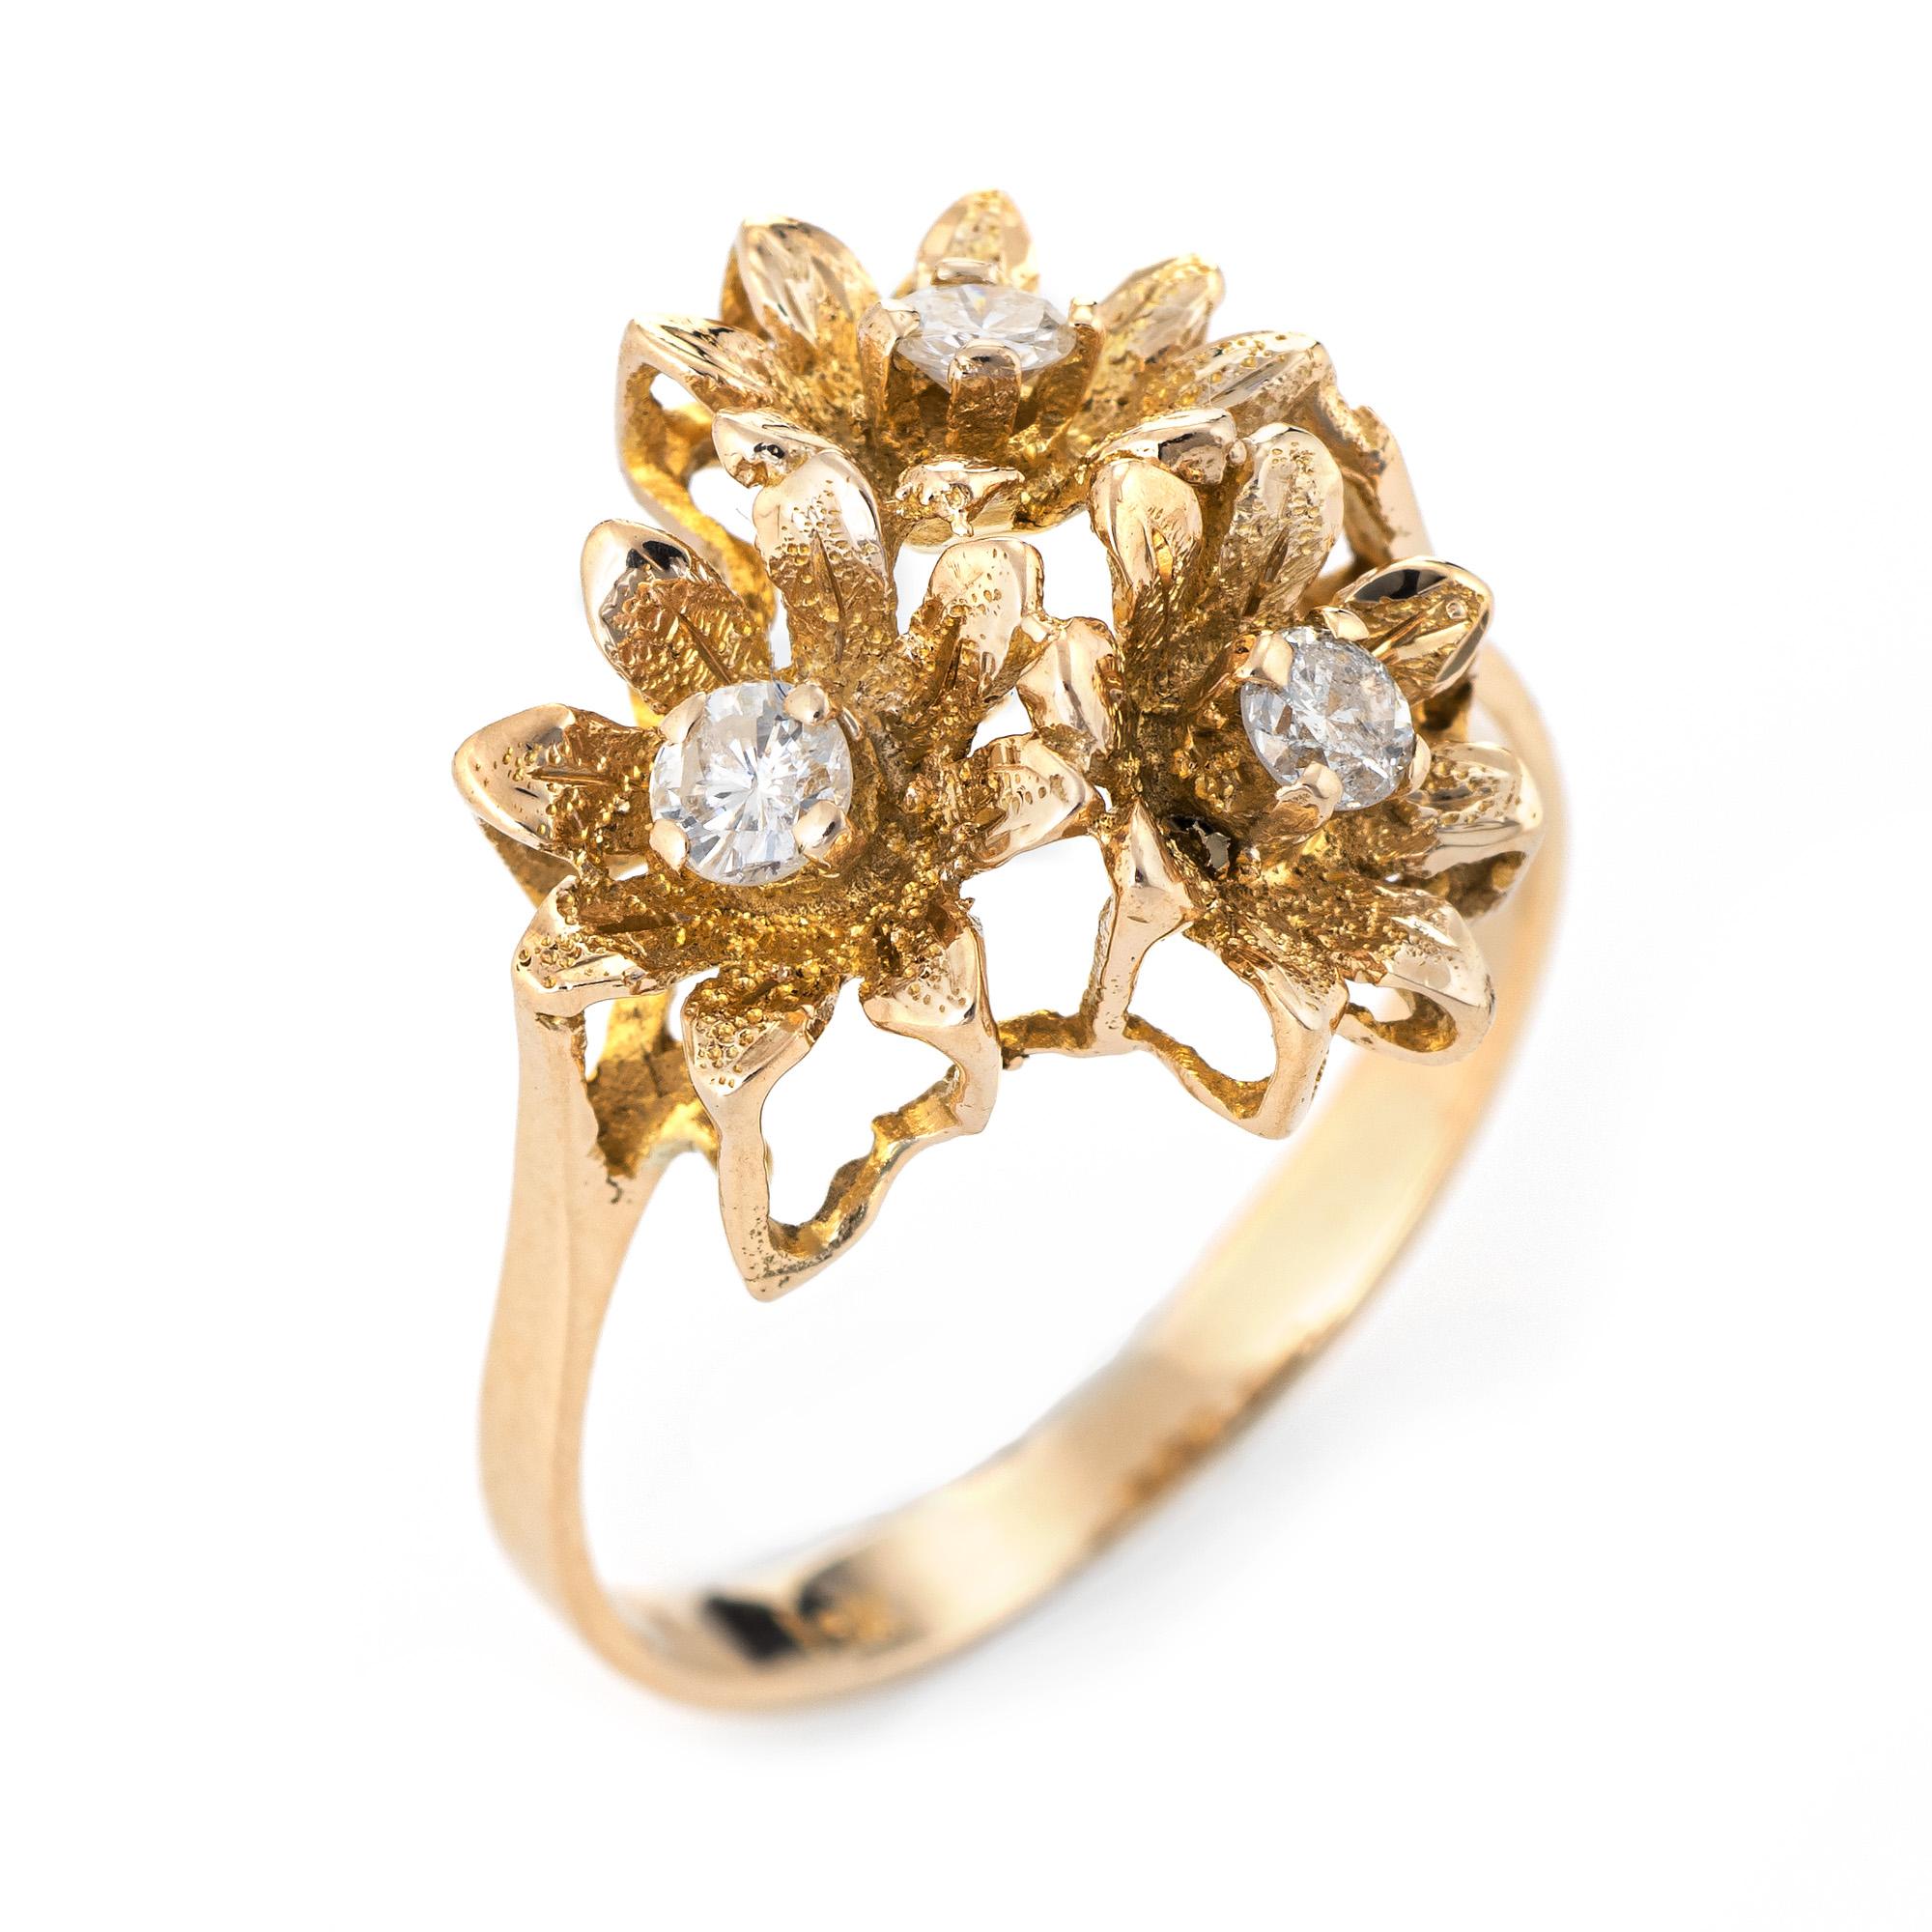 Stylish vintage diamond buttercup cocktail ring crafted in 10 karat yellow gold. 

Three diamonds are estimated at 0.08 carats each and total an estimated 0.24 carats (estimated at H-I color and VS2-SI2 clarity). 

The diamonds are set in three